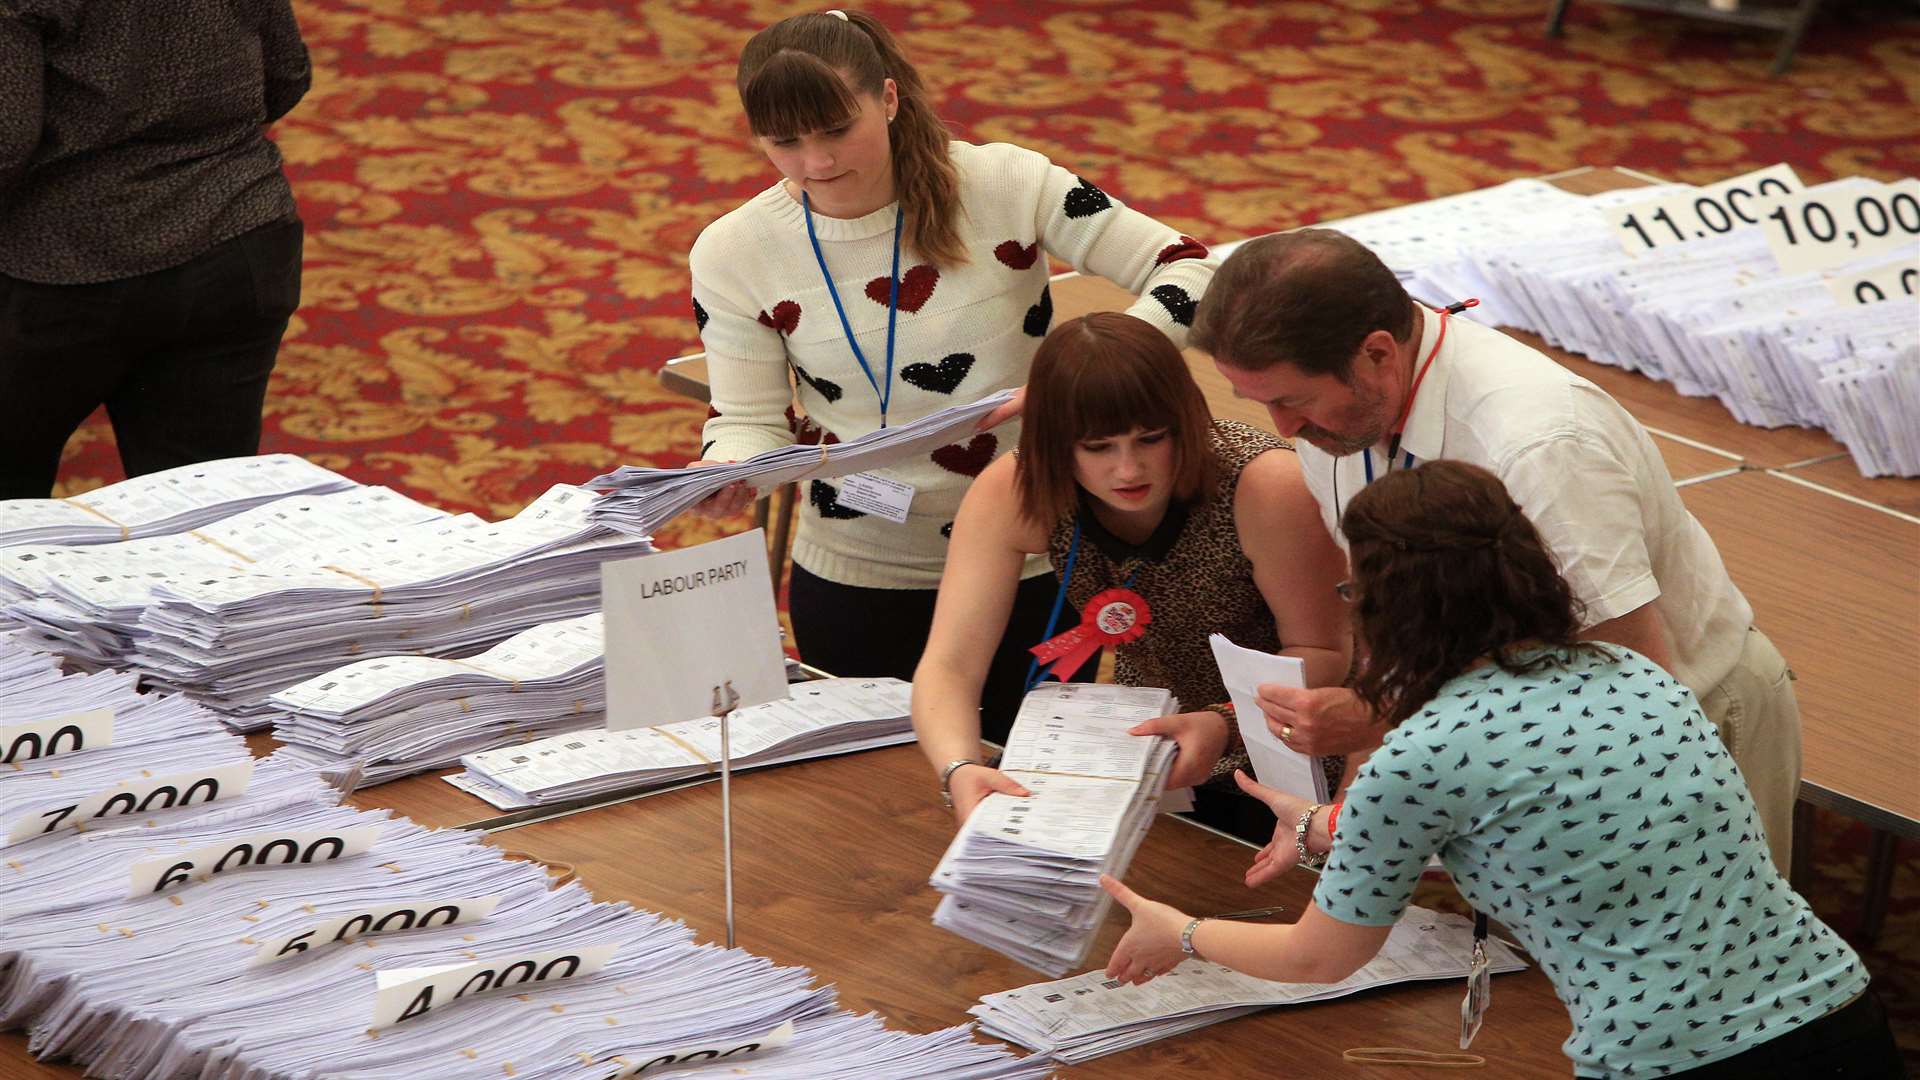 Kent's European election votes were counted in Southampton. Picture: Jon Rowley/SWNS.com